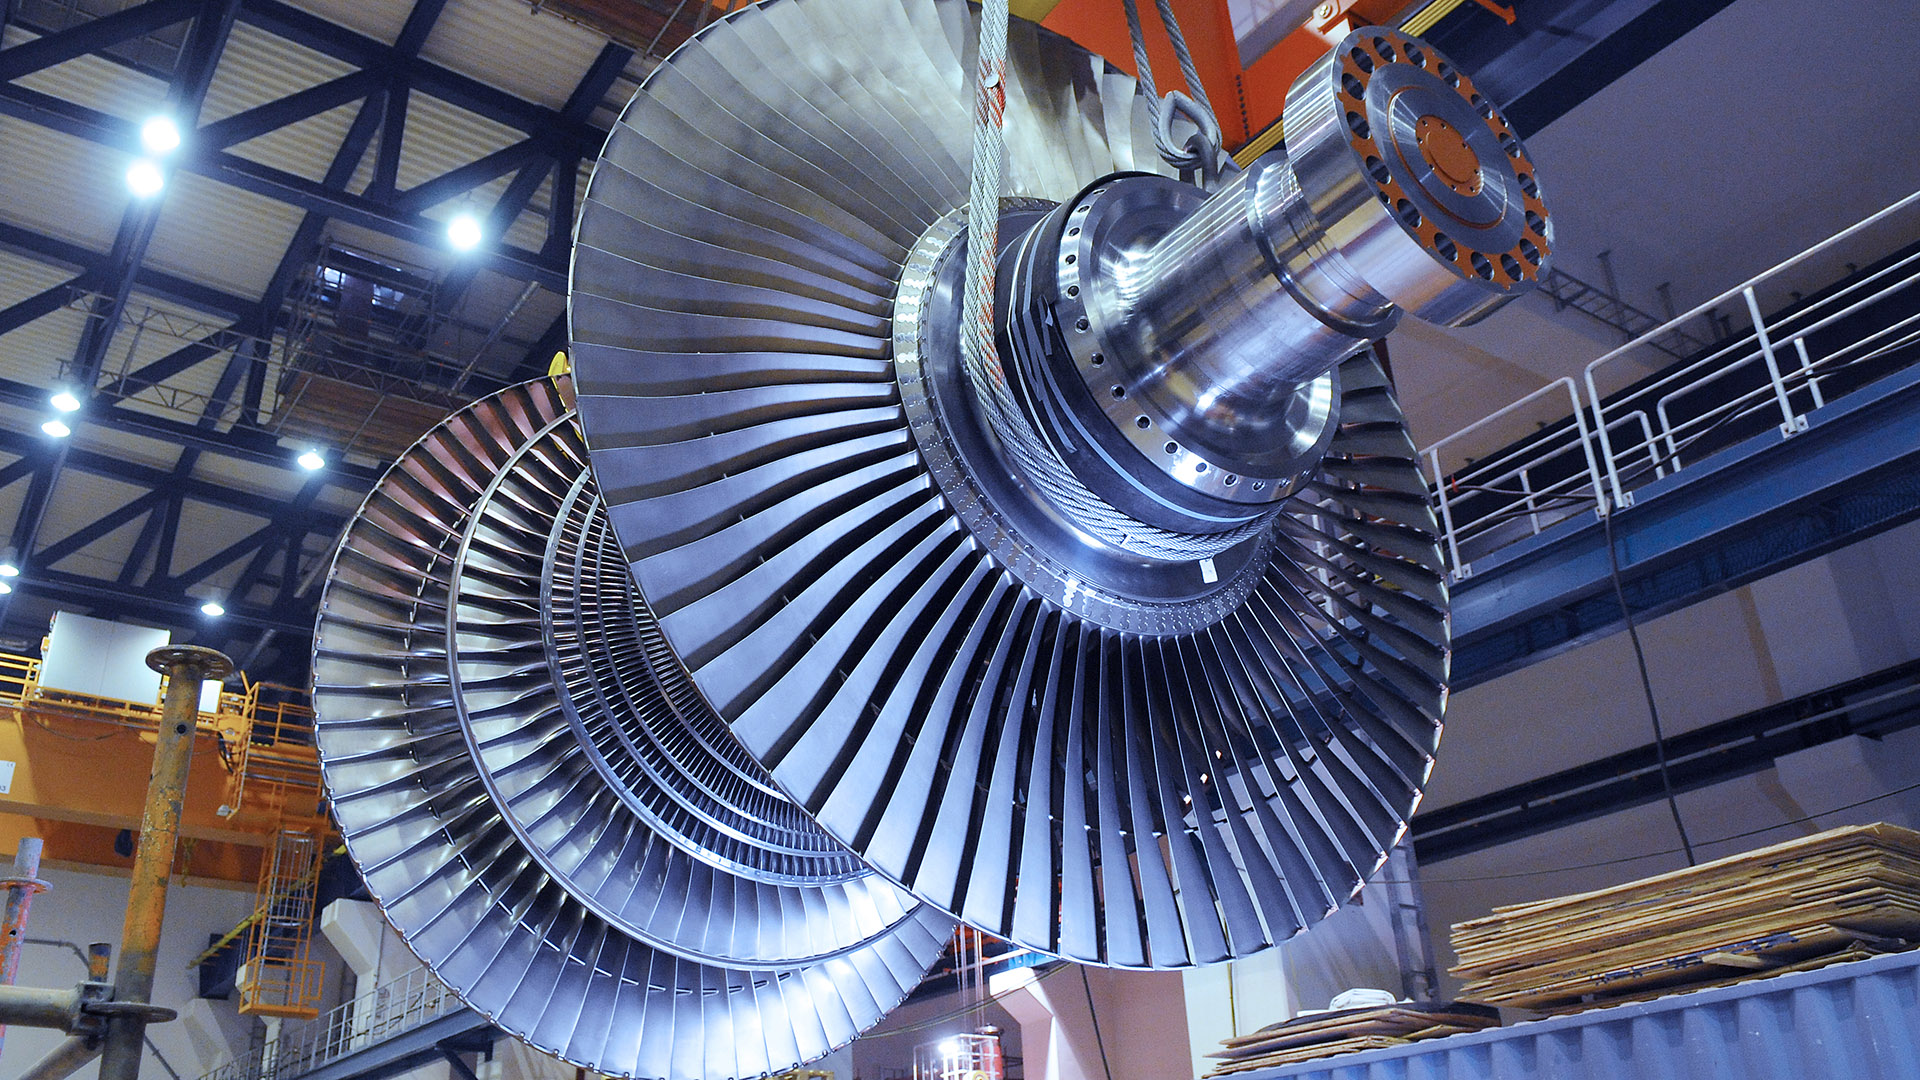 https://www.ge.com/content/dam/gepower-new/global/en_US/images/gas-new-site/products/steam-turbines/hero-steam-turbine-products-gas.jpg